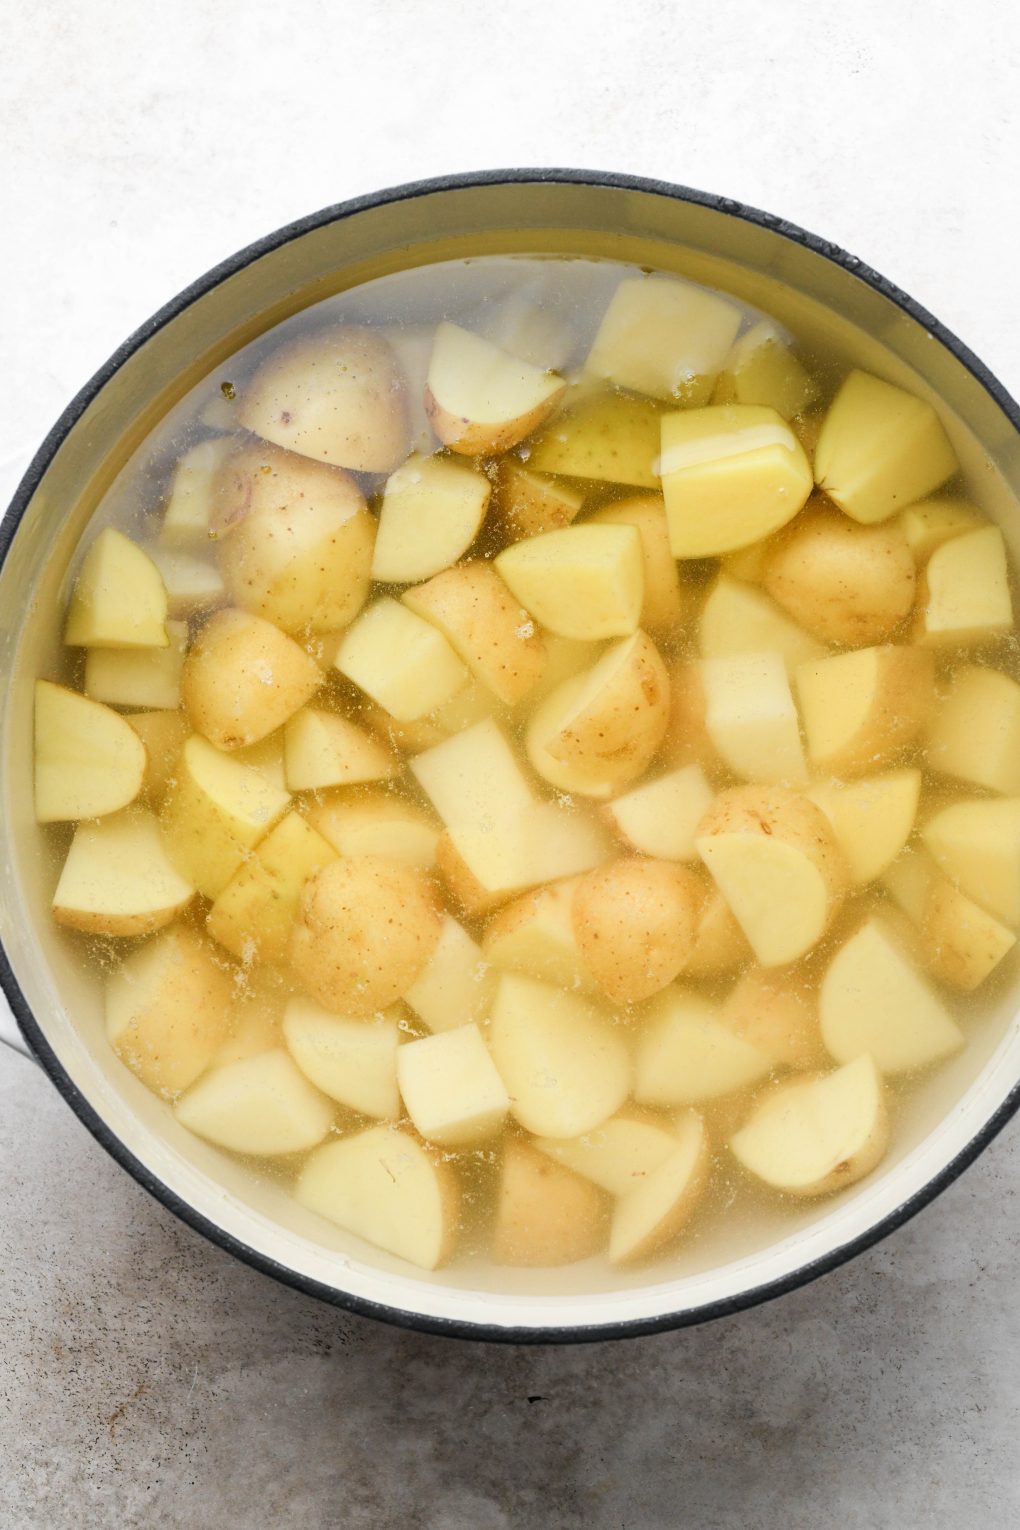 Photos showing how to make Whole30 mashed potatoes - Potatoes in a large pot of water.